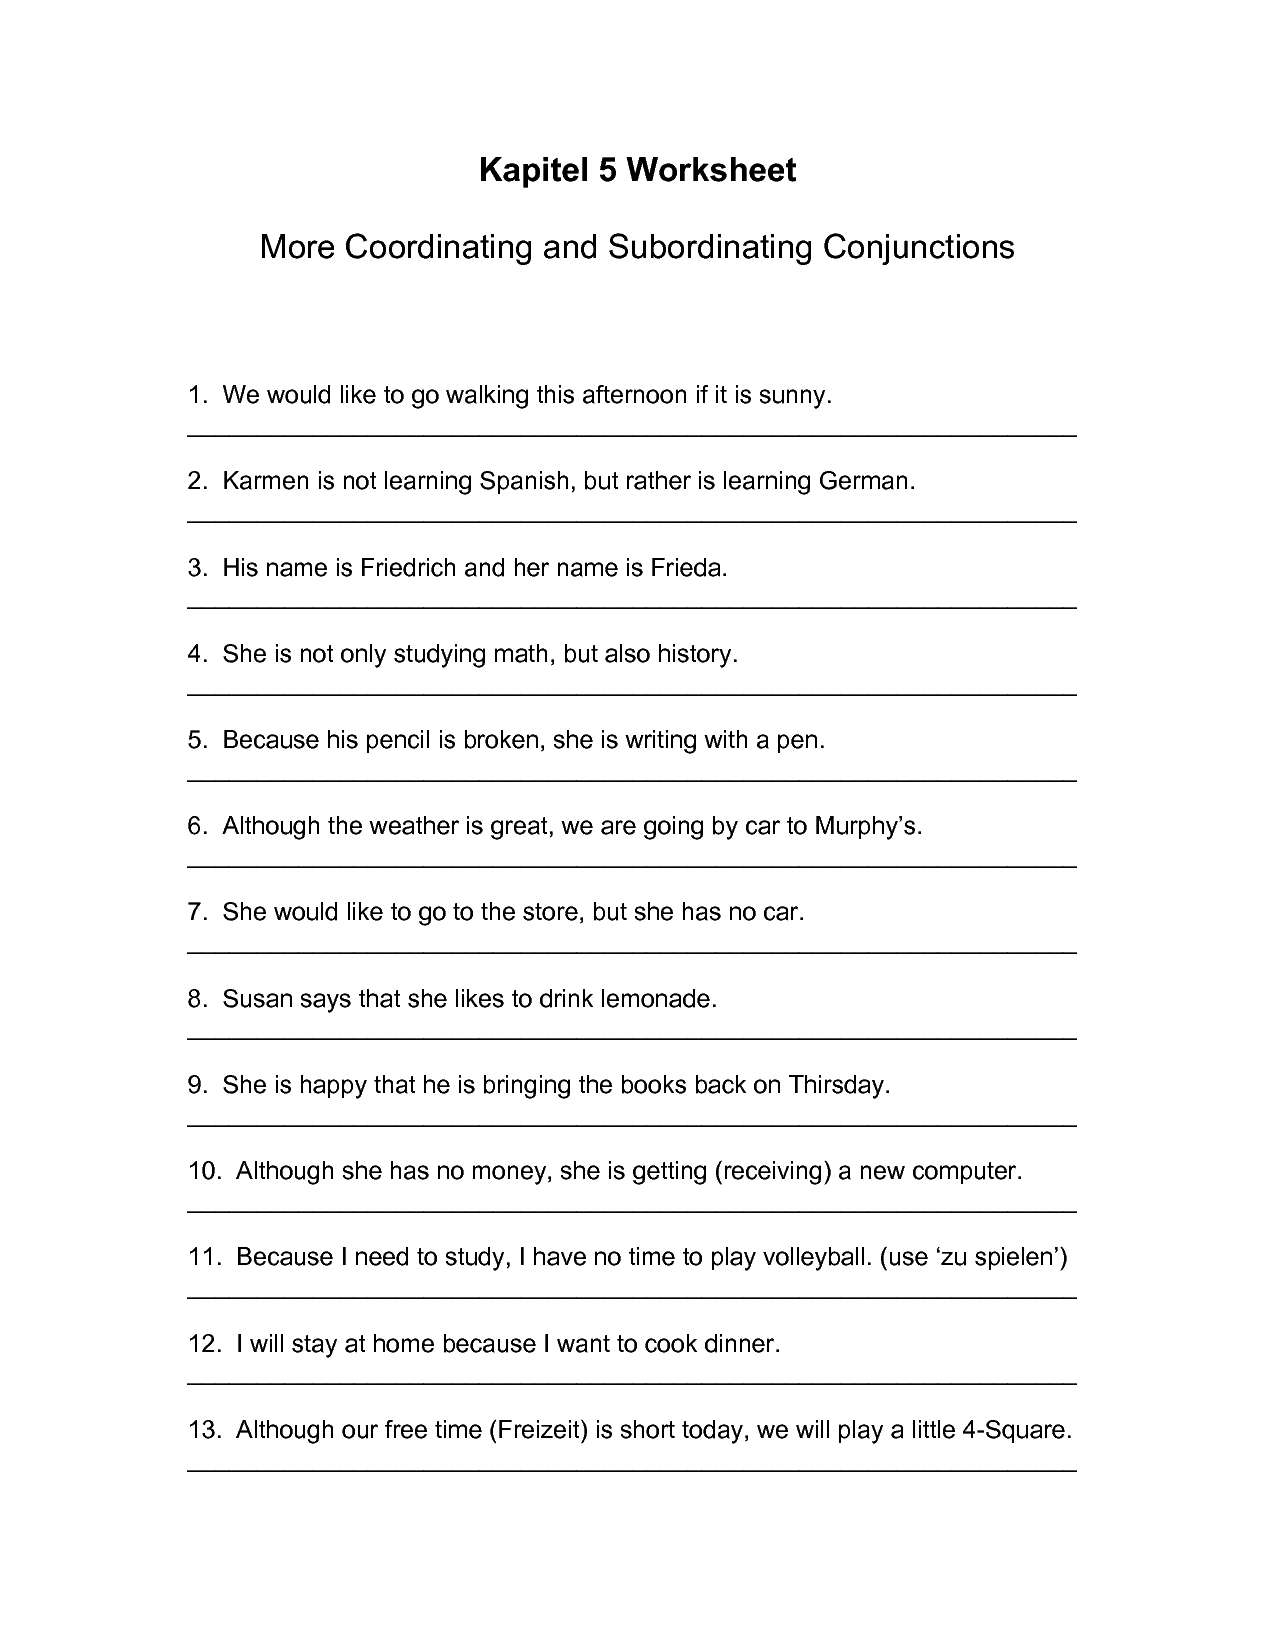 subordinating-conjunctions-worksheets-4th-grade-conjunctions